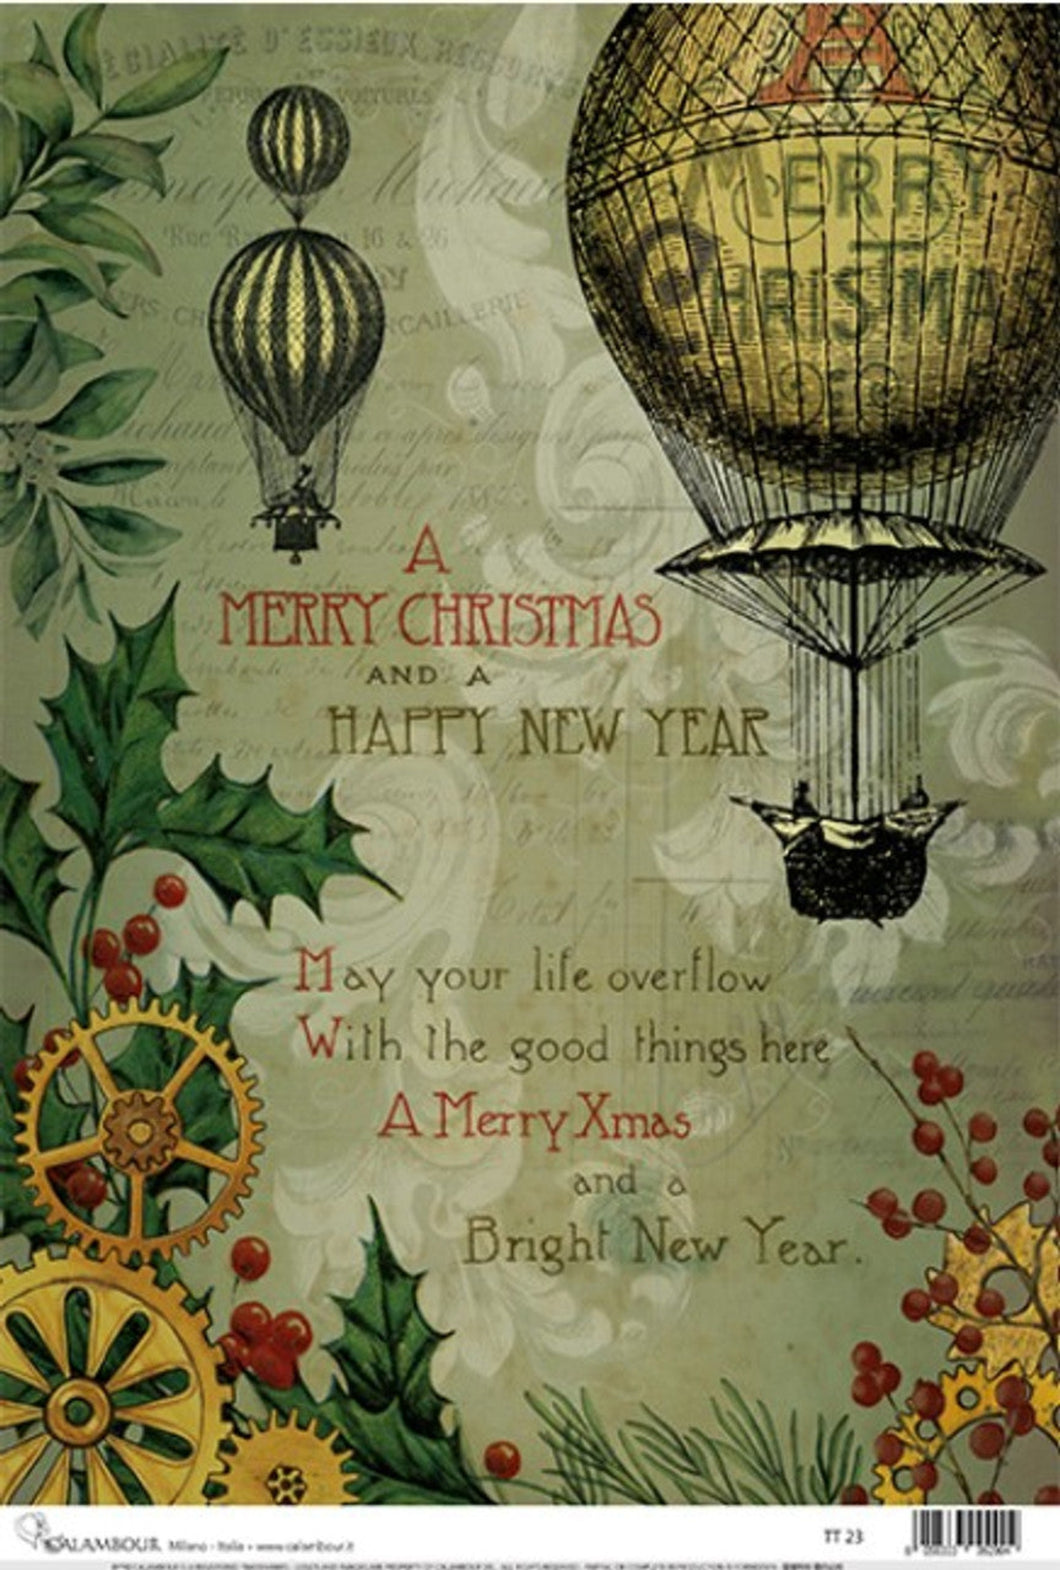 Steampunk Balloon Christmas Greetings Rice Paper by Calambour Italy TT23